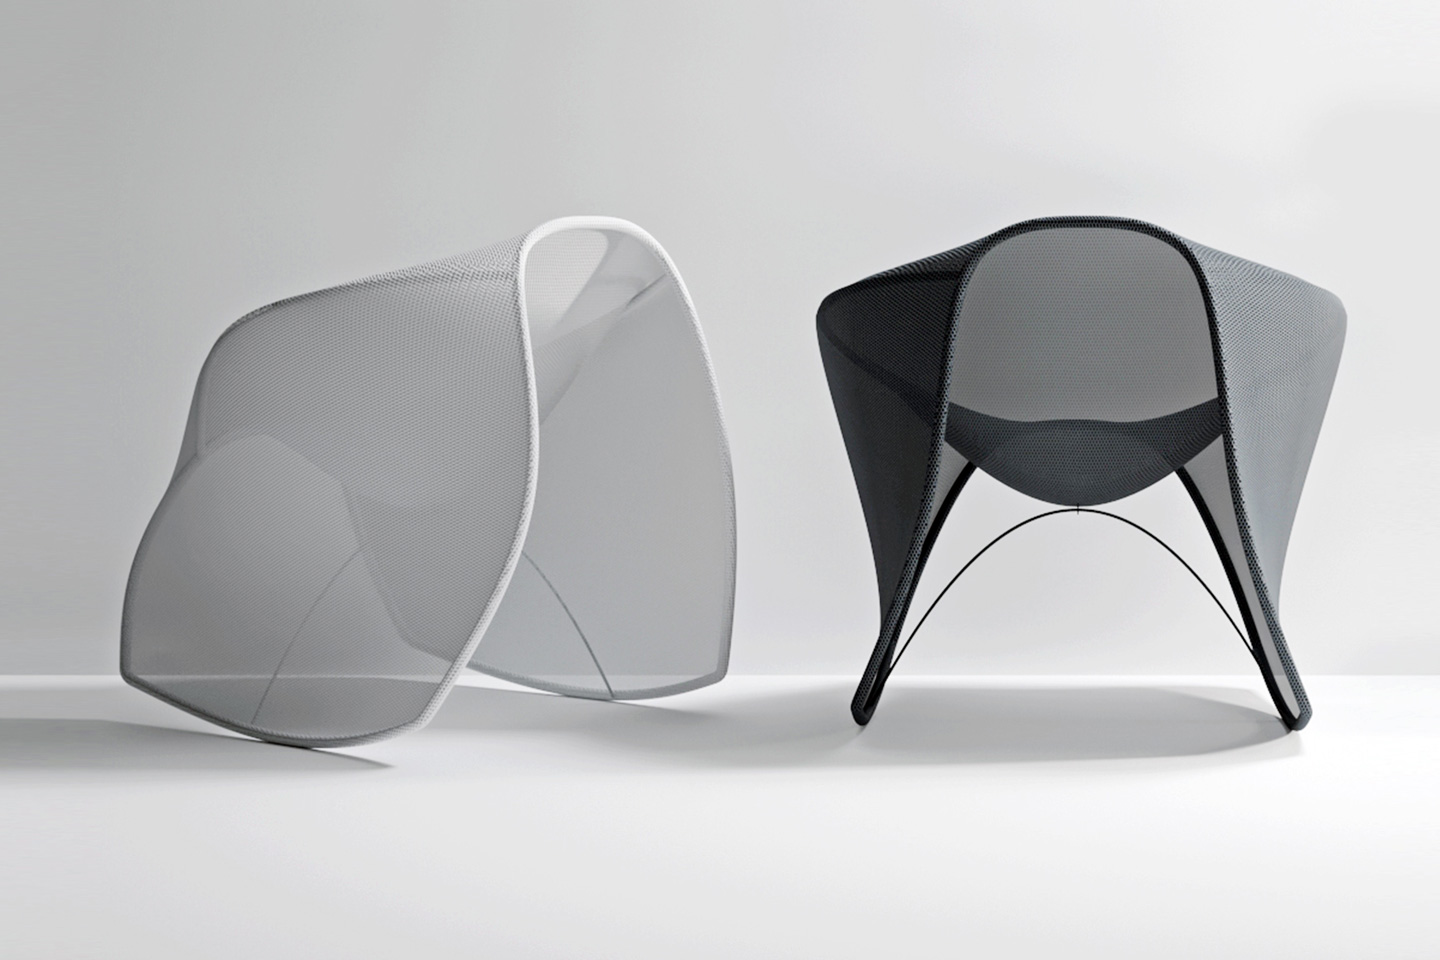 #Award-winning rocking chair uses a tensile fabric and metal framework to achieve uniqueness